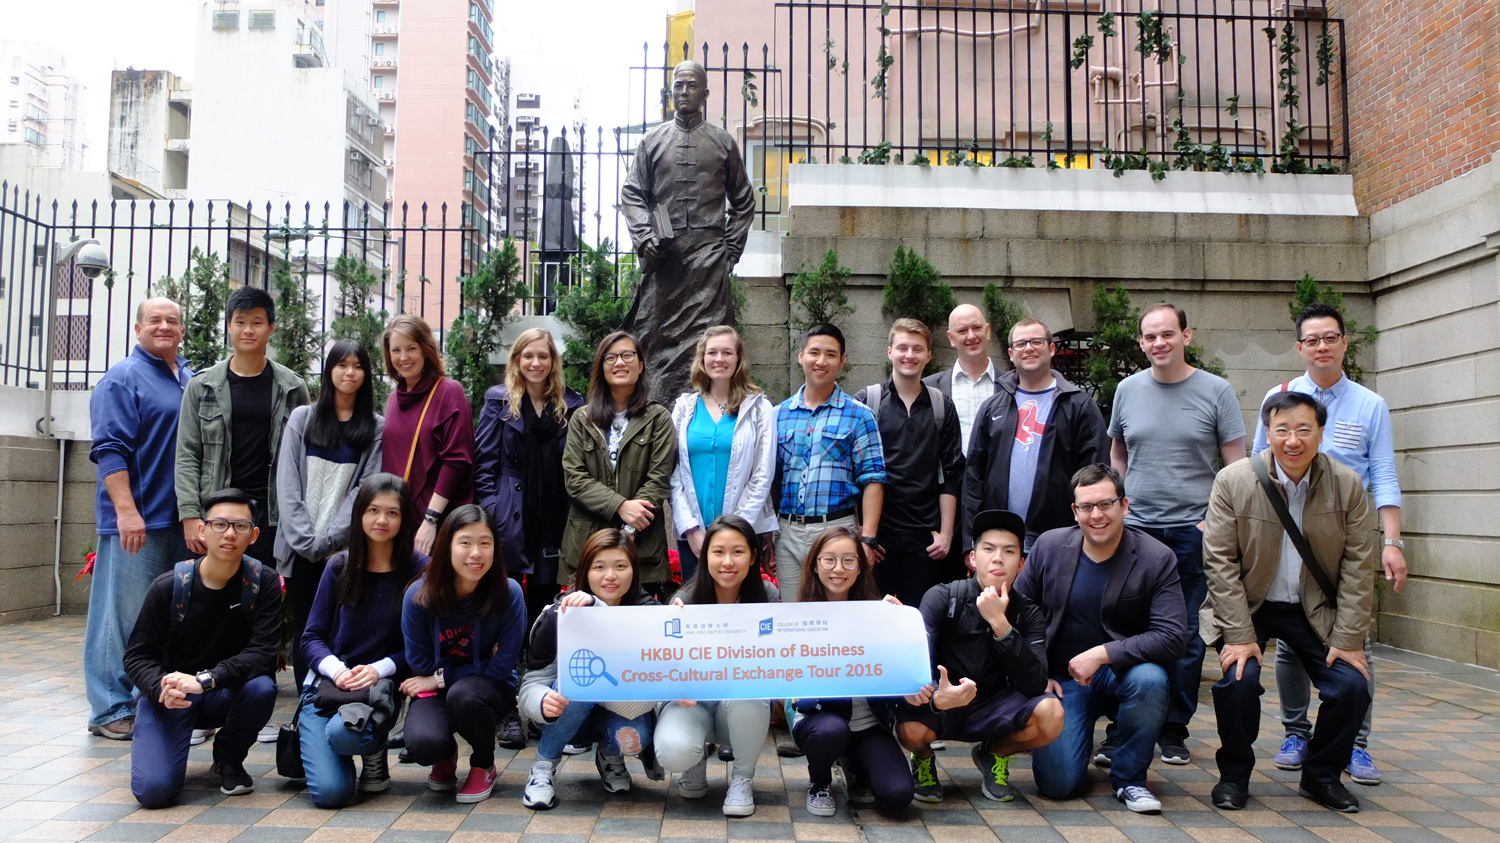 CIE organises cross-cultural exchange tour with Creighton University in Hong Kong